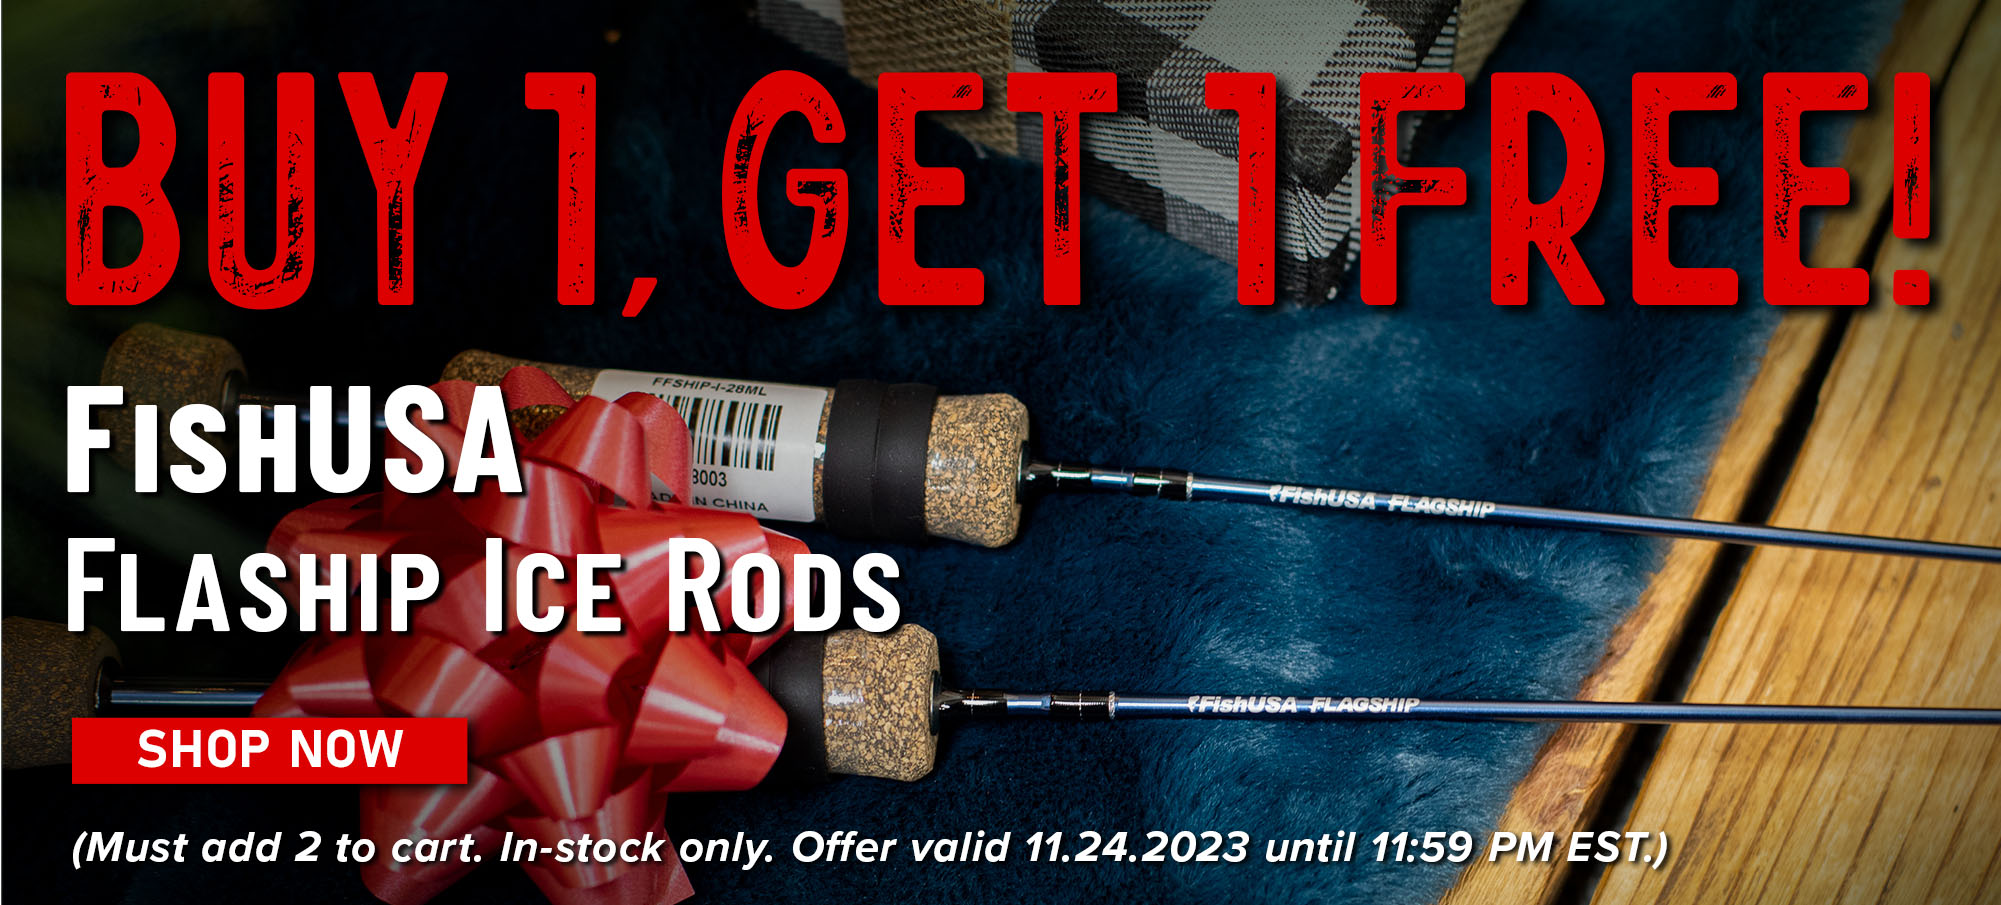 Buy 1, Get 1 Free! FishUSA Flagship Ice Rods Shop Now (Must add 2 to cart. In-stock only. Offer valid 11.24.2023 until 11:59 PM EST.)